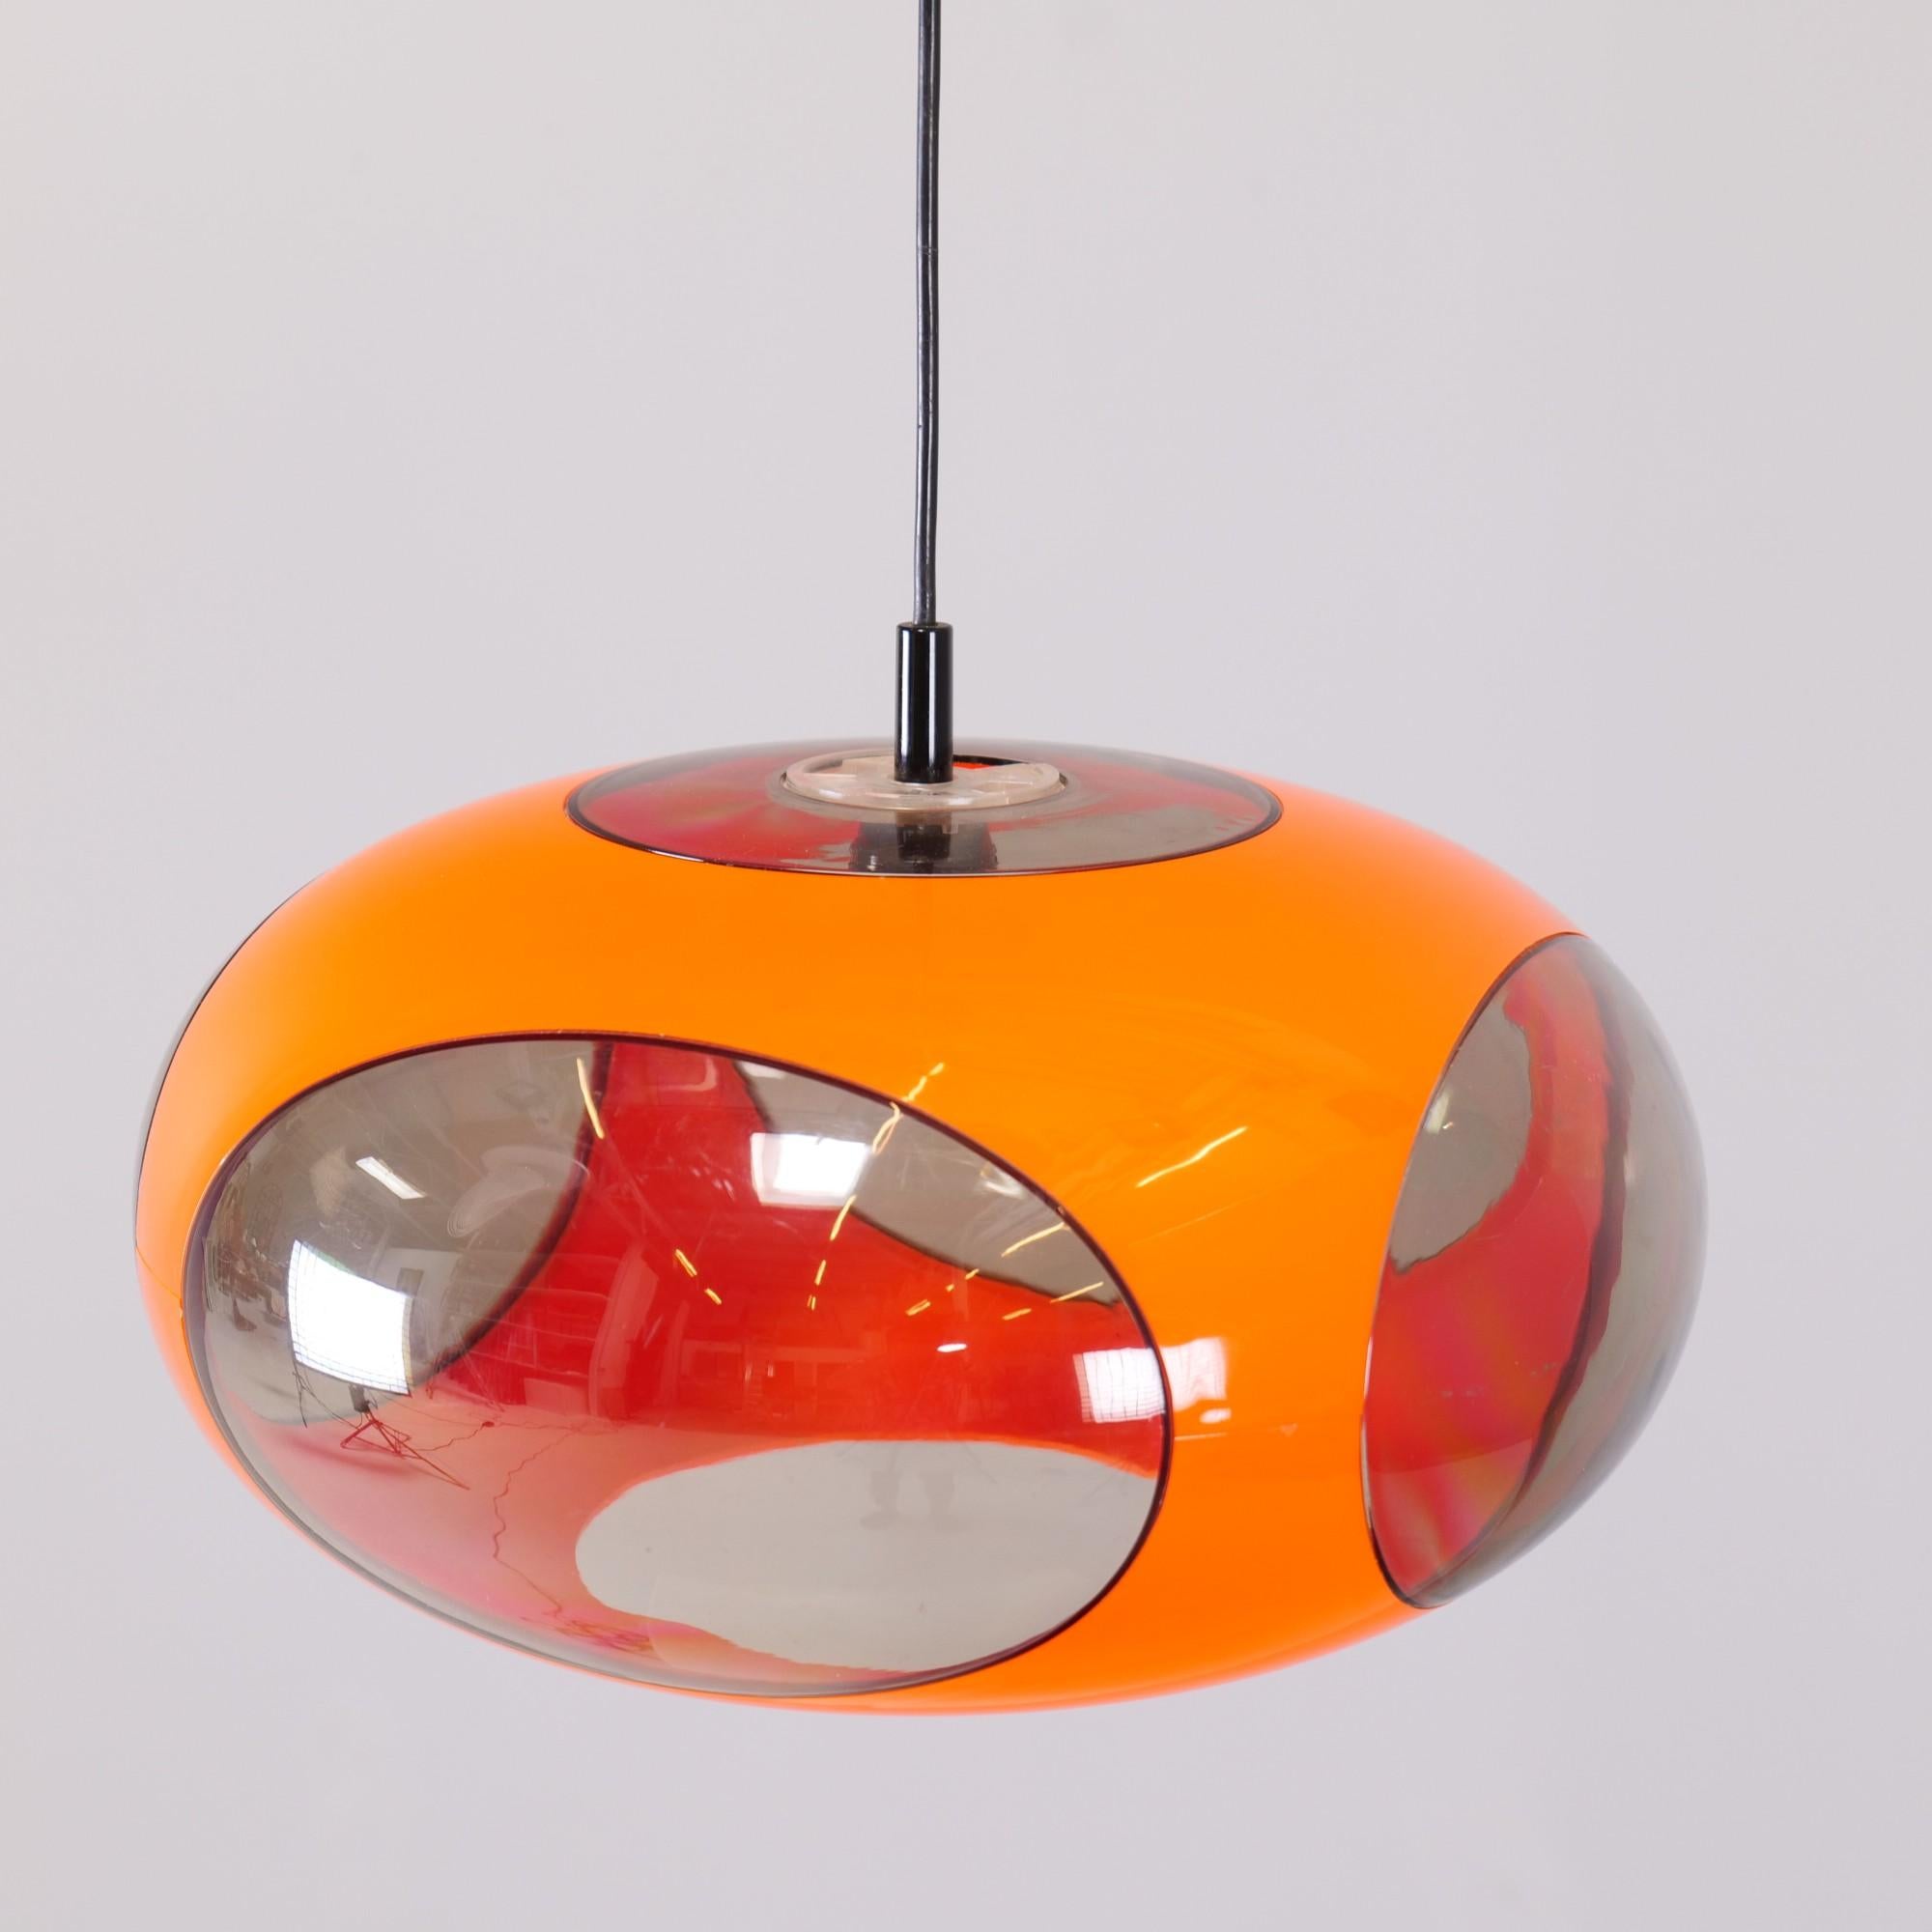 Rare space-age lamp from Massive Belgium in the style of Luigi Colani.

Dimensions:
85 cm height (cable is easily replaceable variable).
40 cm width/diameter
Material:
acrylic, plastic

E27 socket up to 250 V (LED recommended)